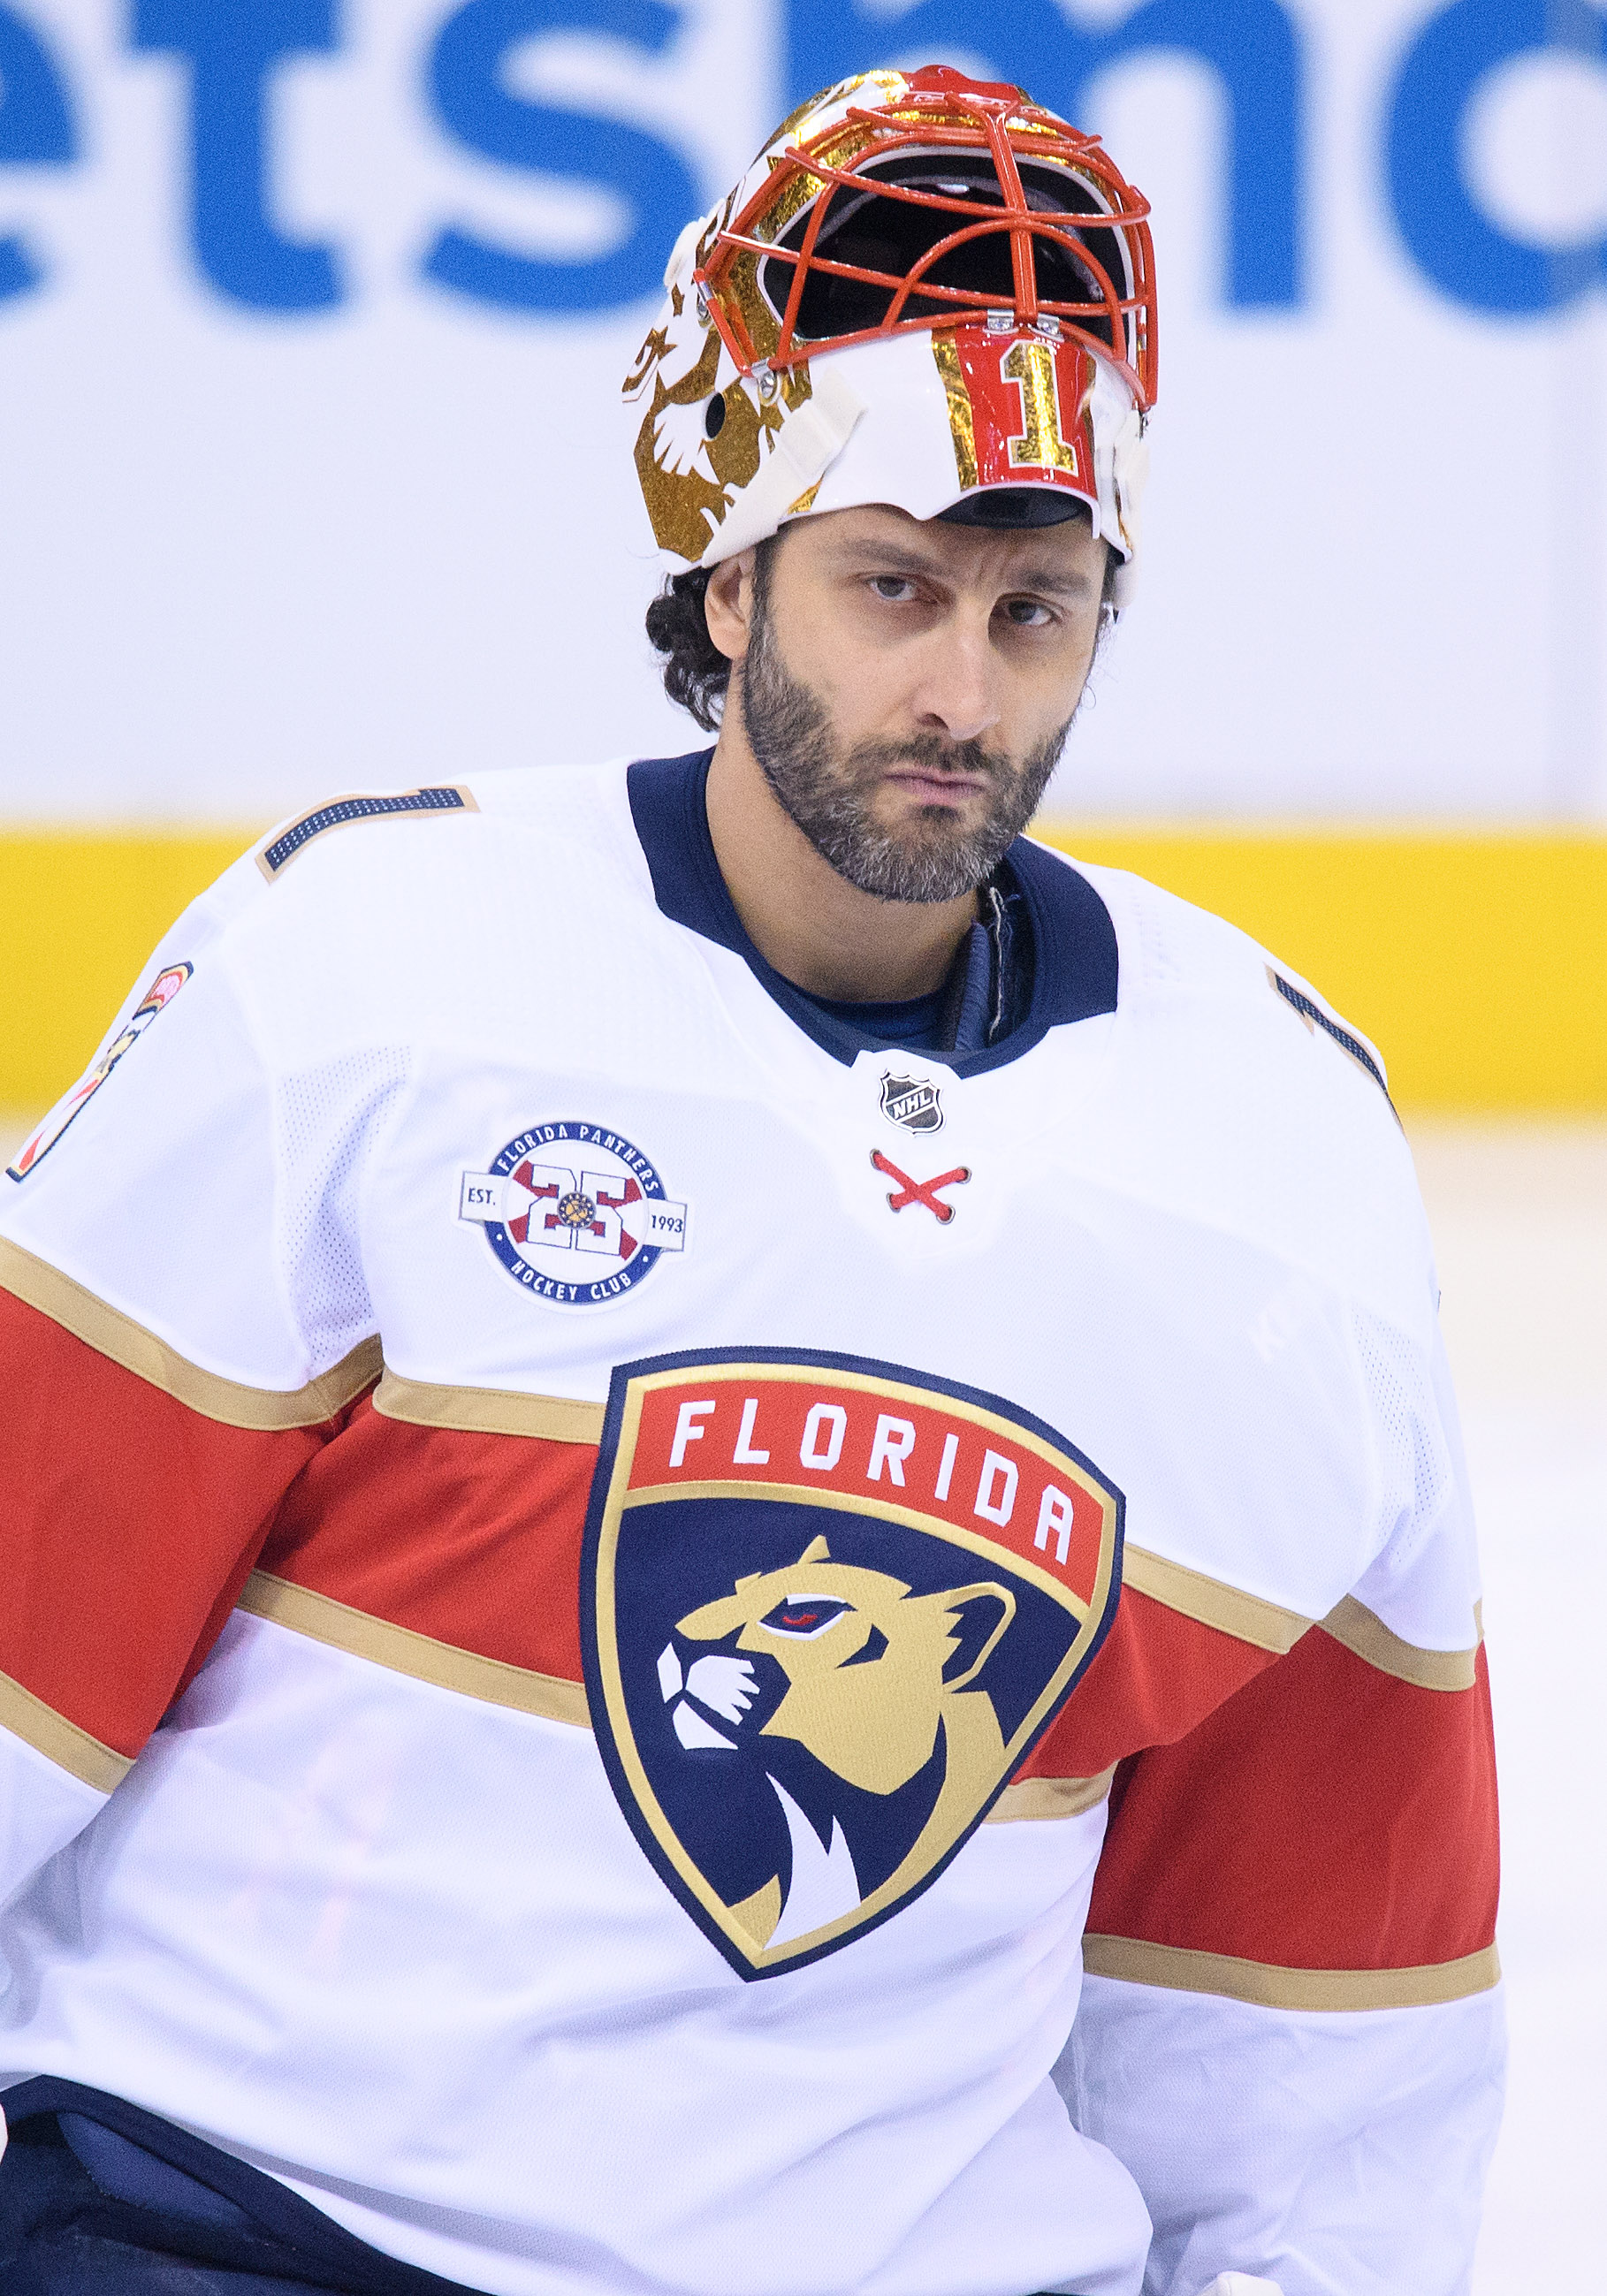 Roberto Luongo to become first Panthers player to have number